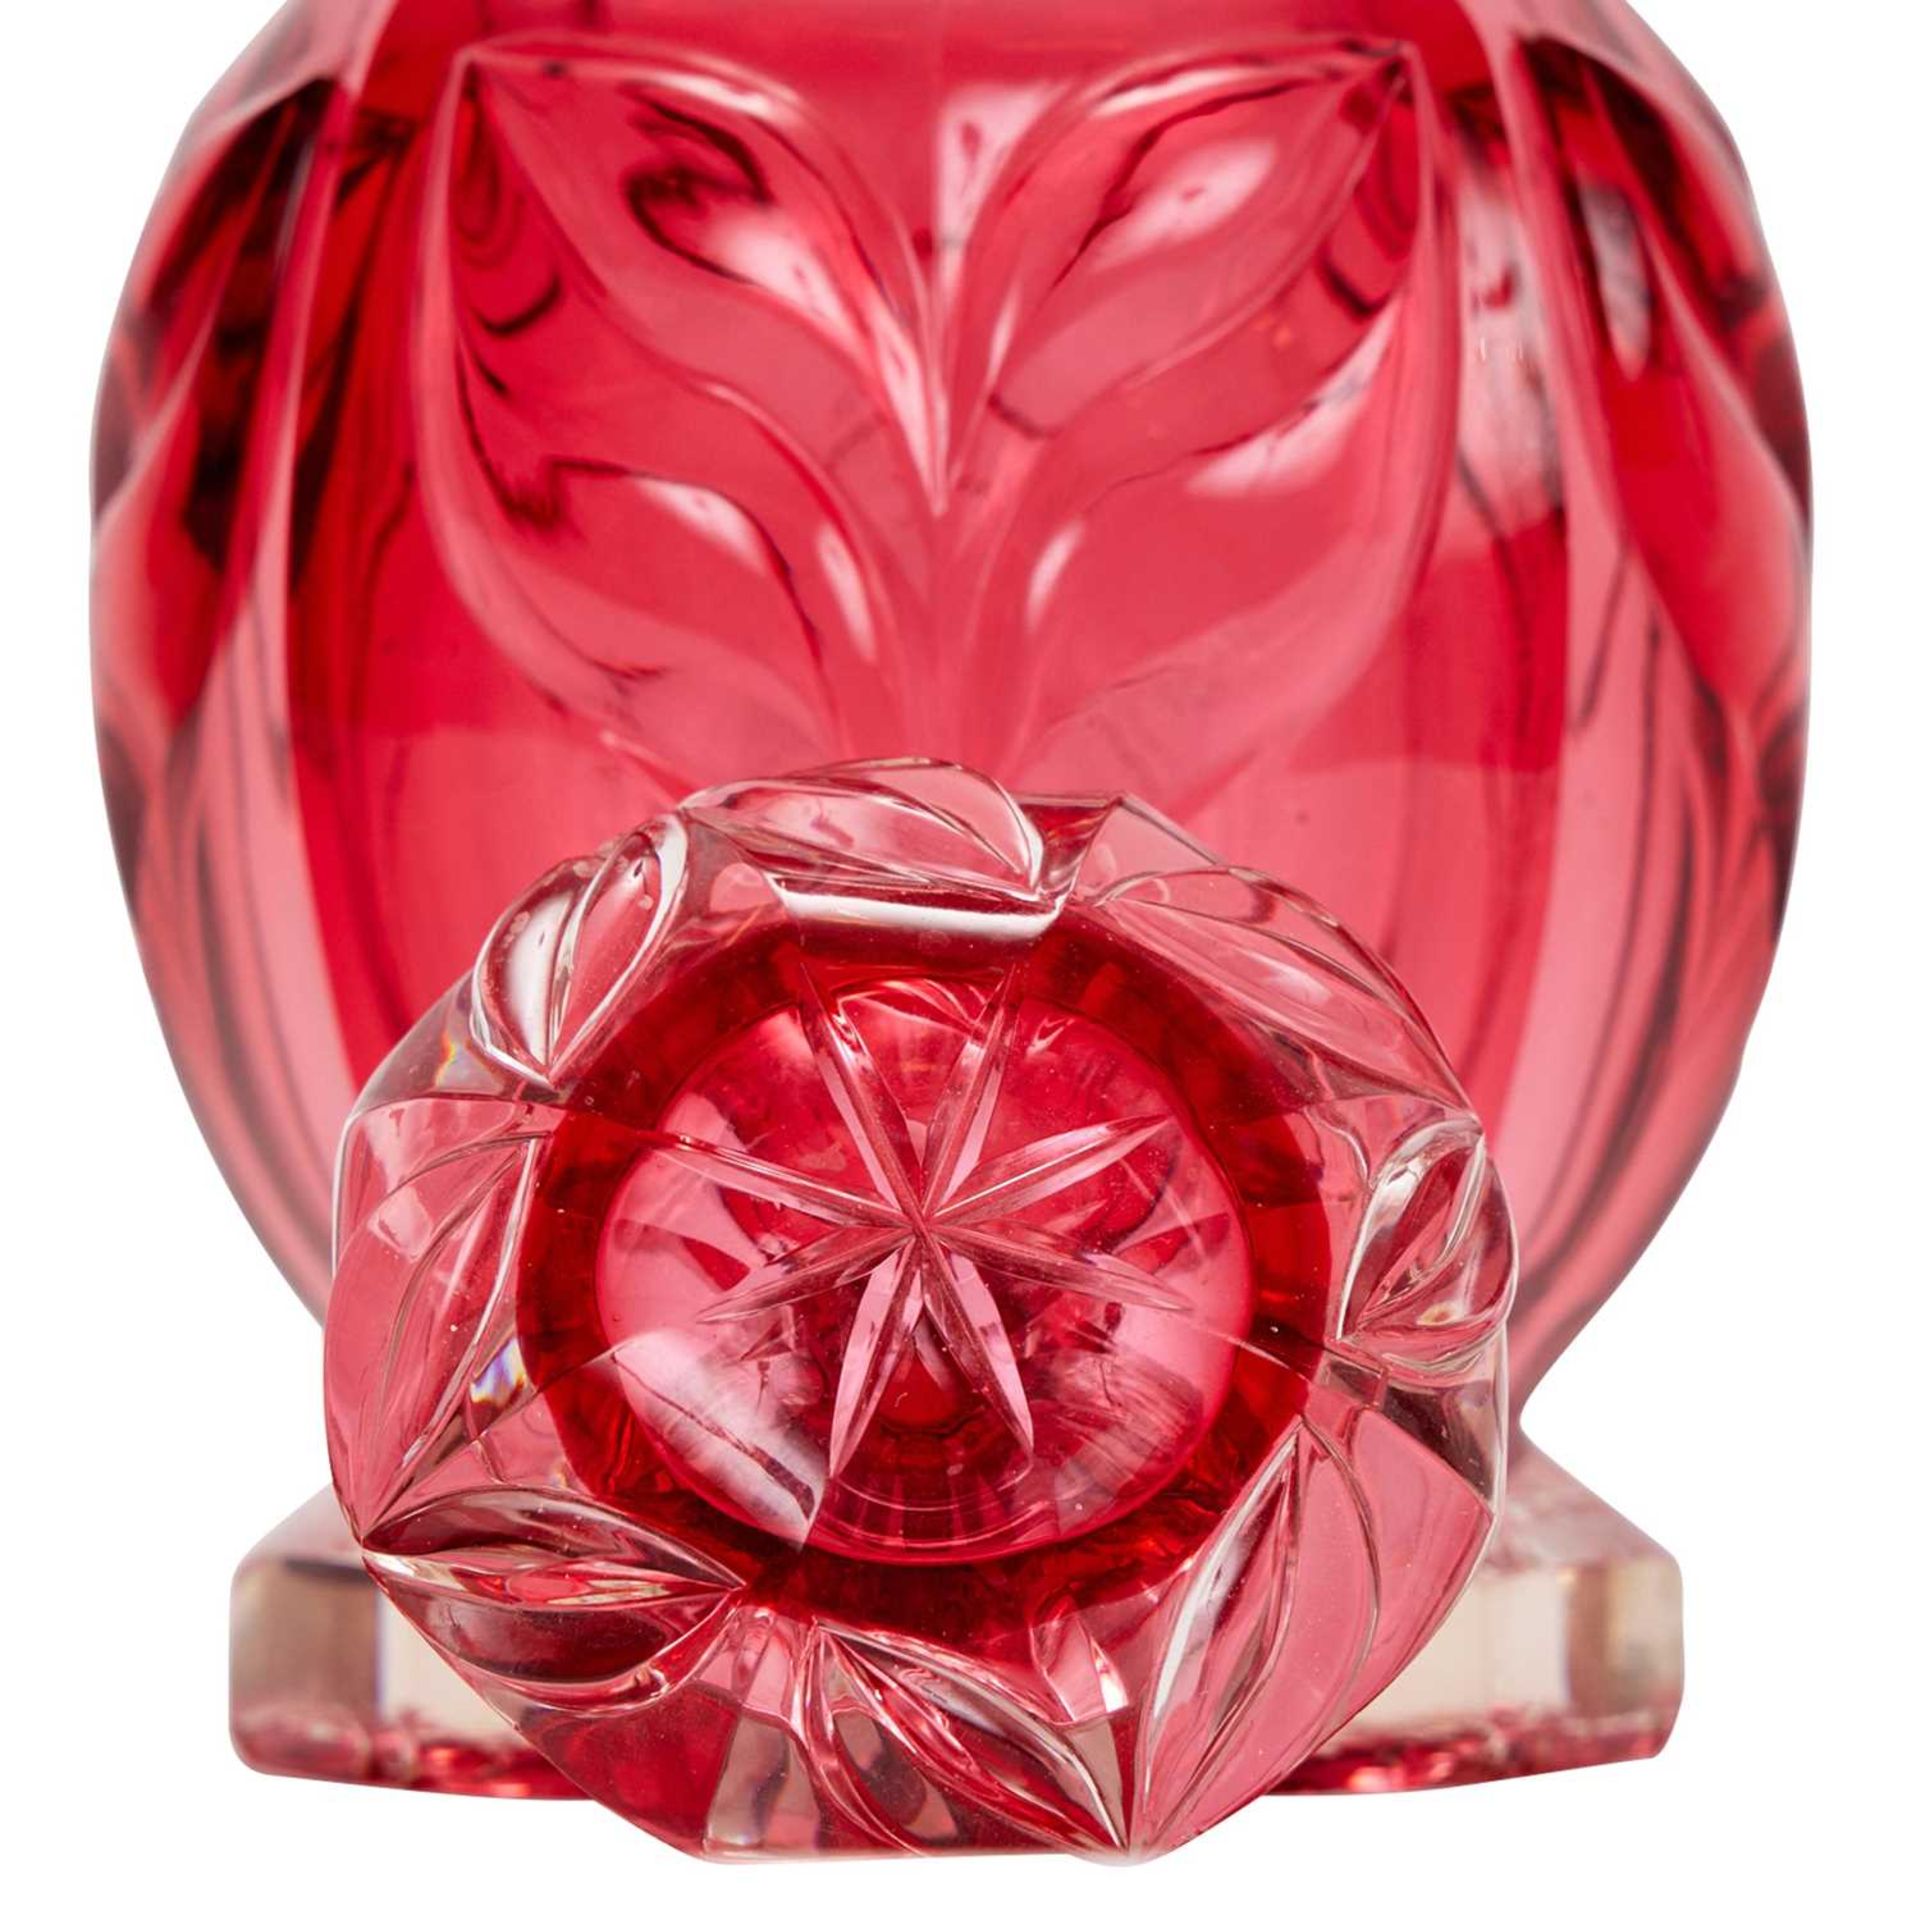 A LATE 19TH CENTURY RUBY CUT GLASS DECANTER ATTRIBUTED TO STEVENS AND WILLIAMS - Image 2 of 4